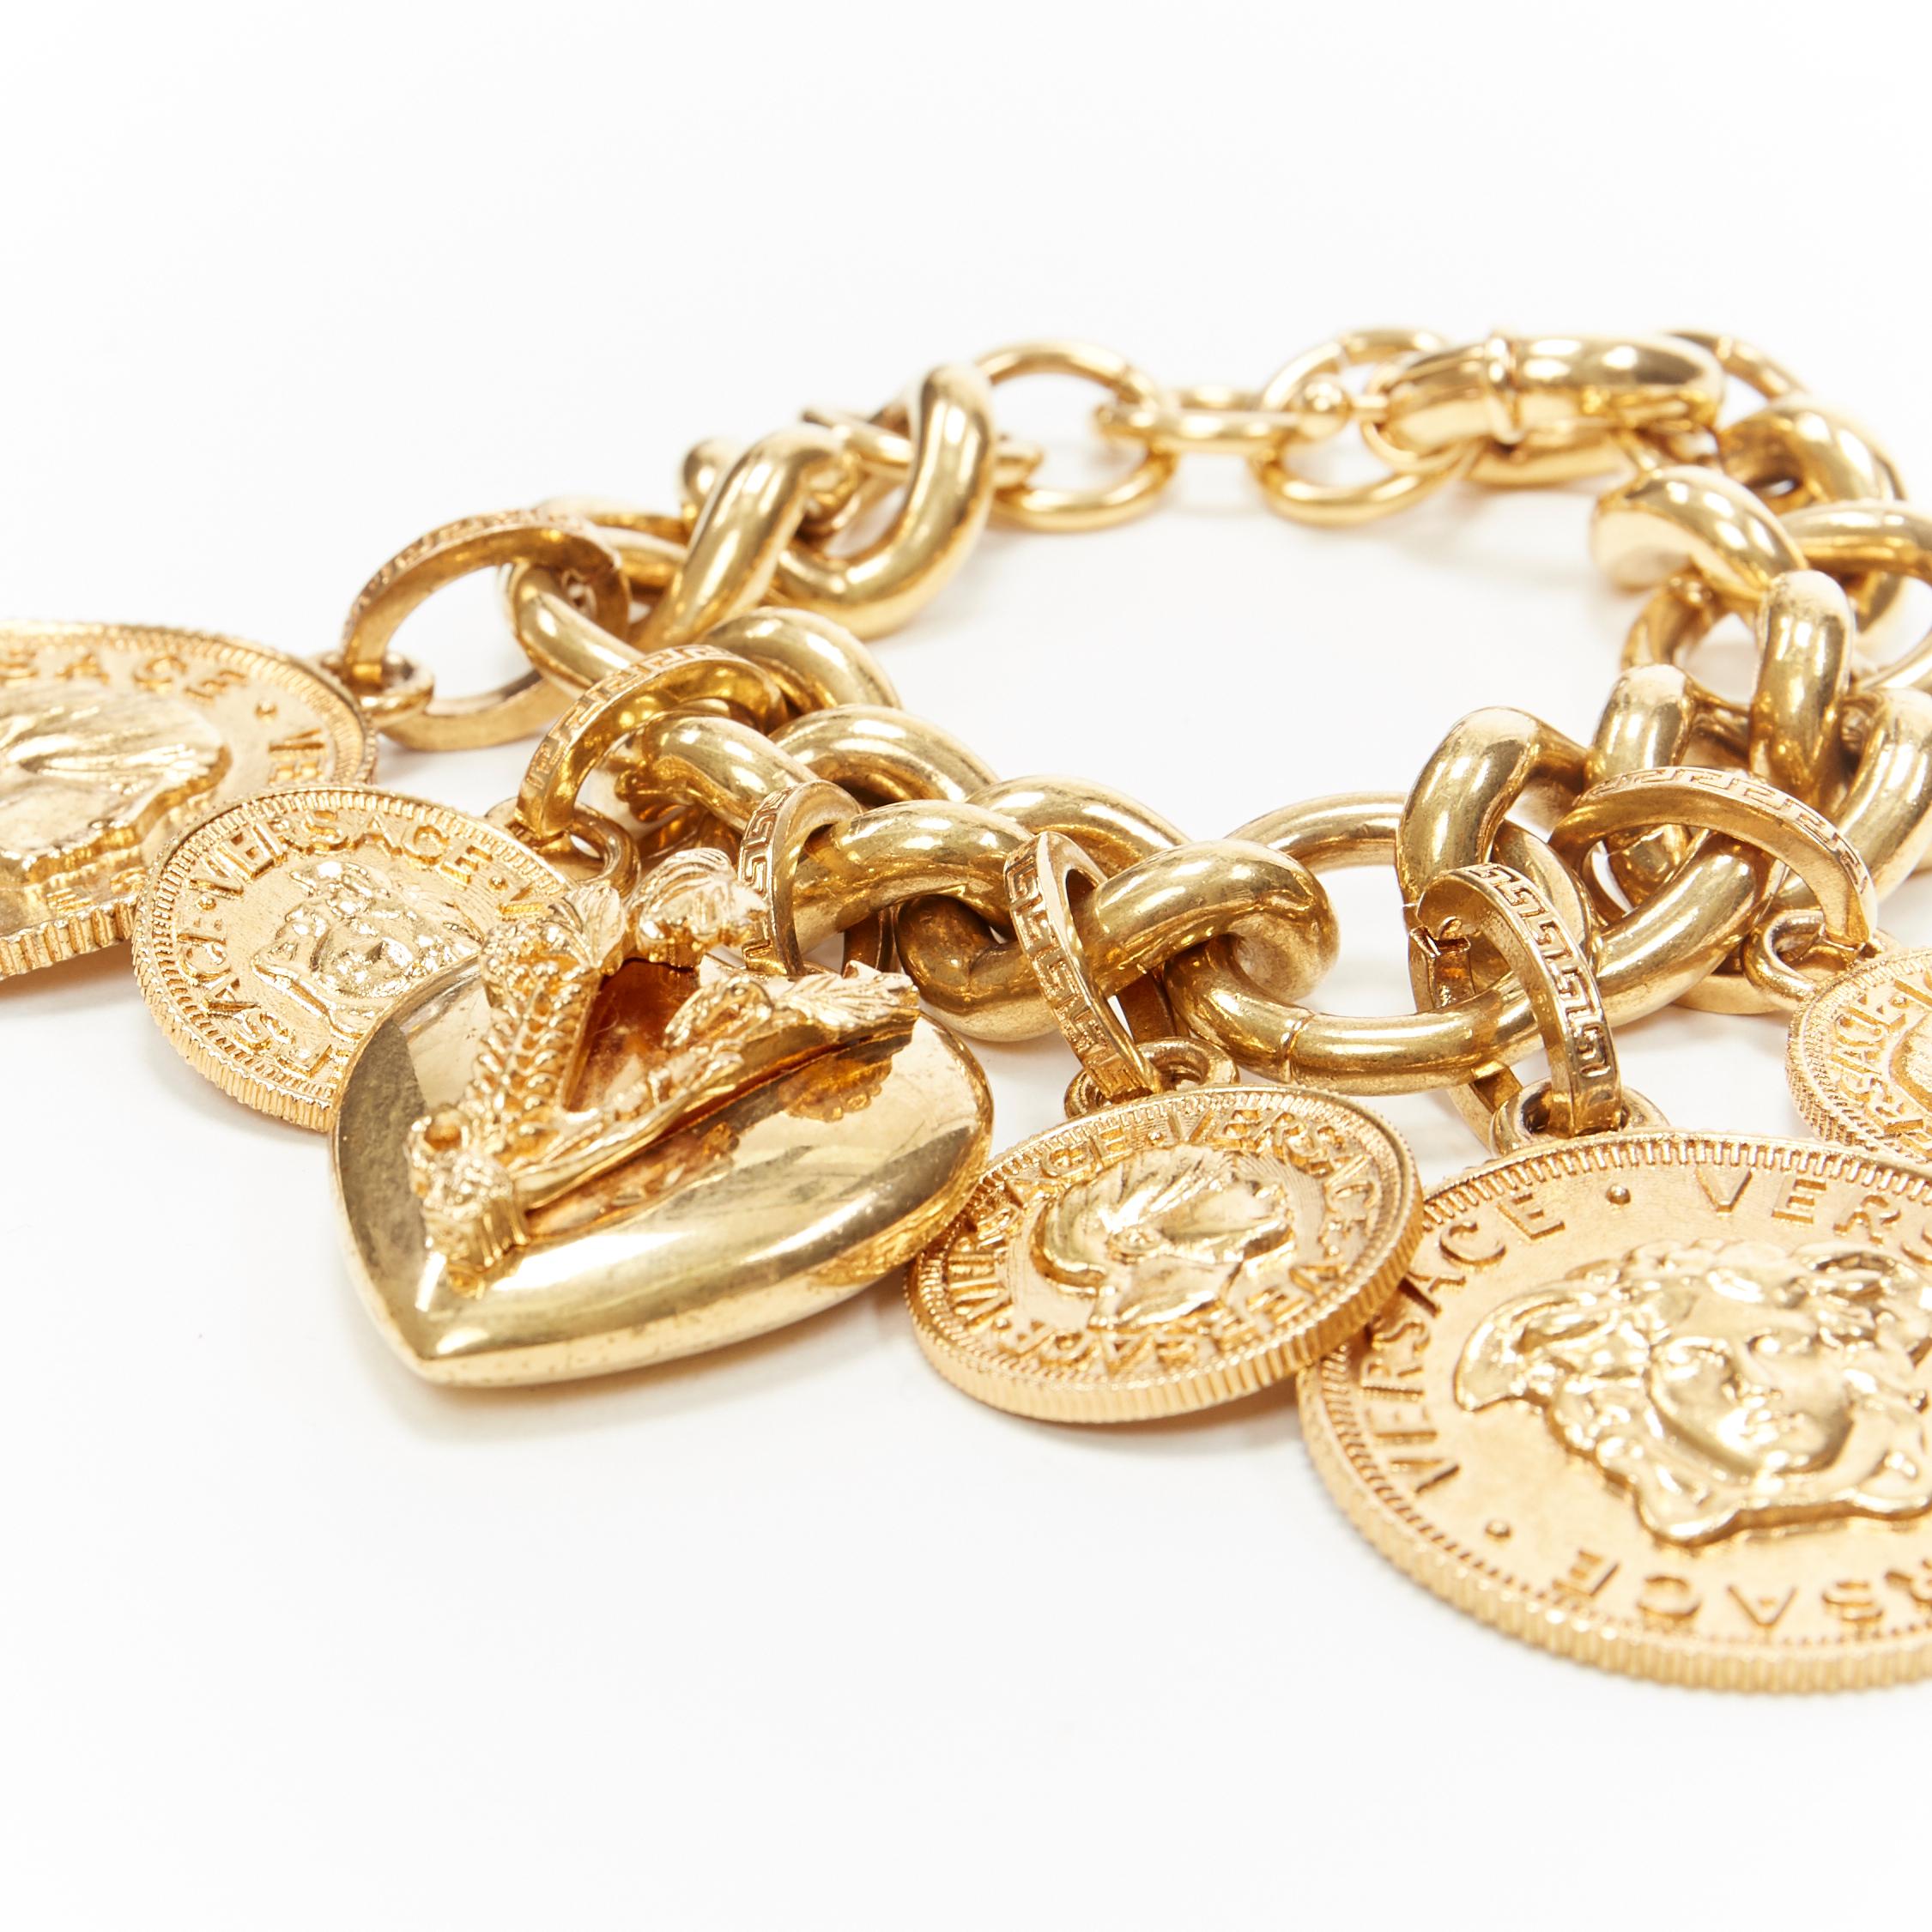 new VERSACE gold plated V-Mine Heart Medusa medallion coin charm chunky bracelet
Brand: Versace
Designer: Donatella Versace
Collection: 2019
Model Name / Style: Chunky bracelet
Material: Metal
Color: Gold
Pattern: Solid
Closure: Clasp
Extra Detail: